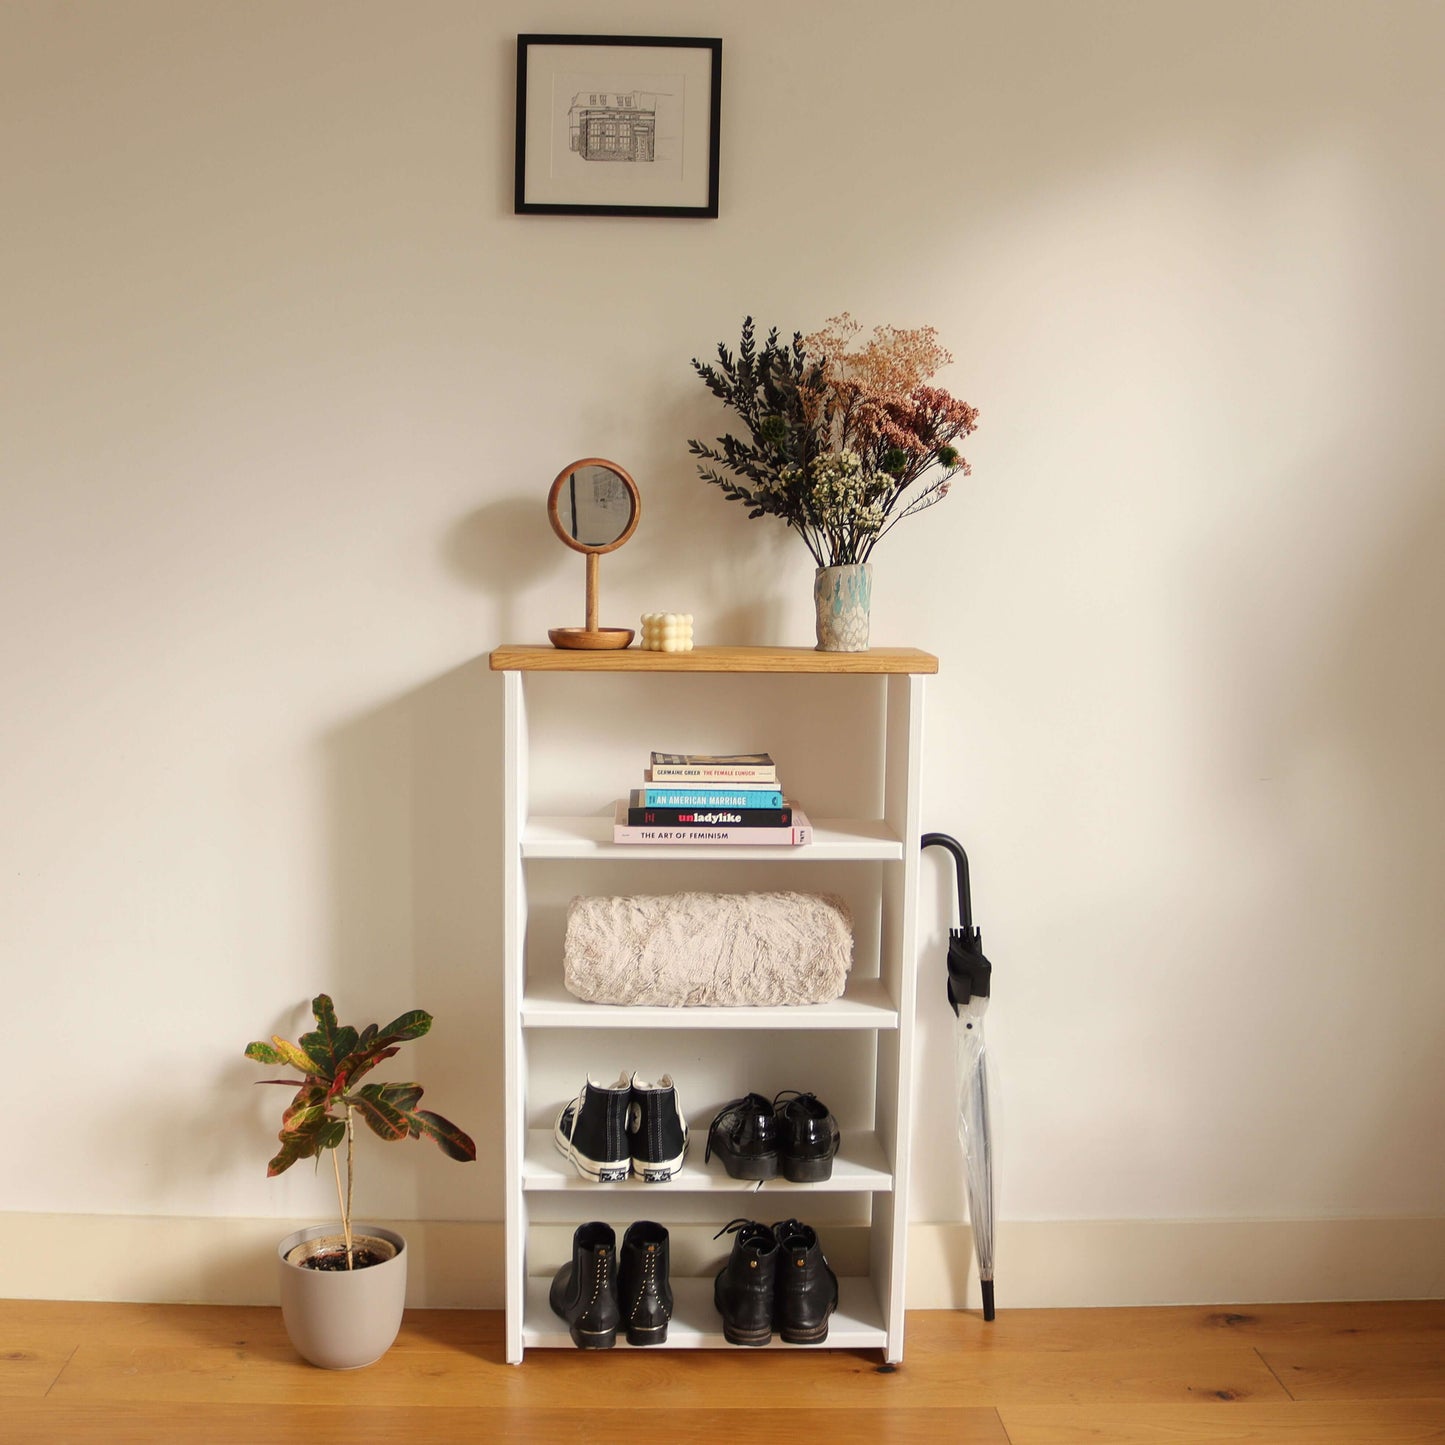 Wooden Shoe Rack Tall 50 cm by 22 cm by 70 cm